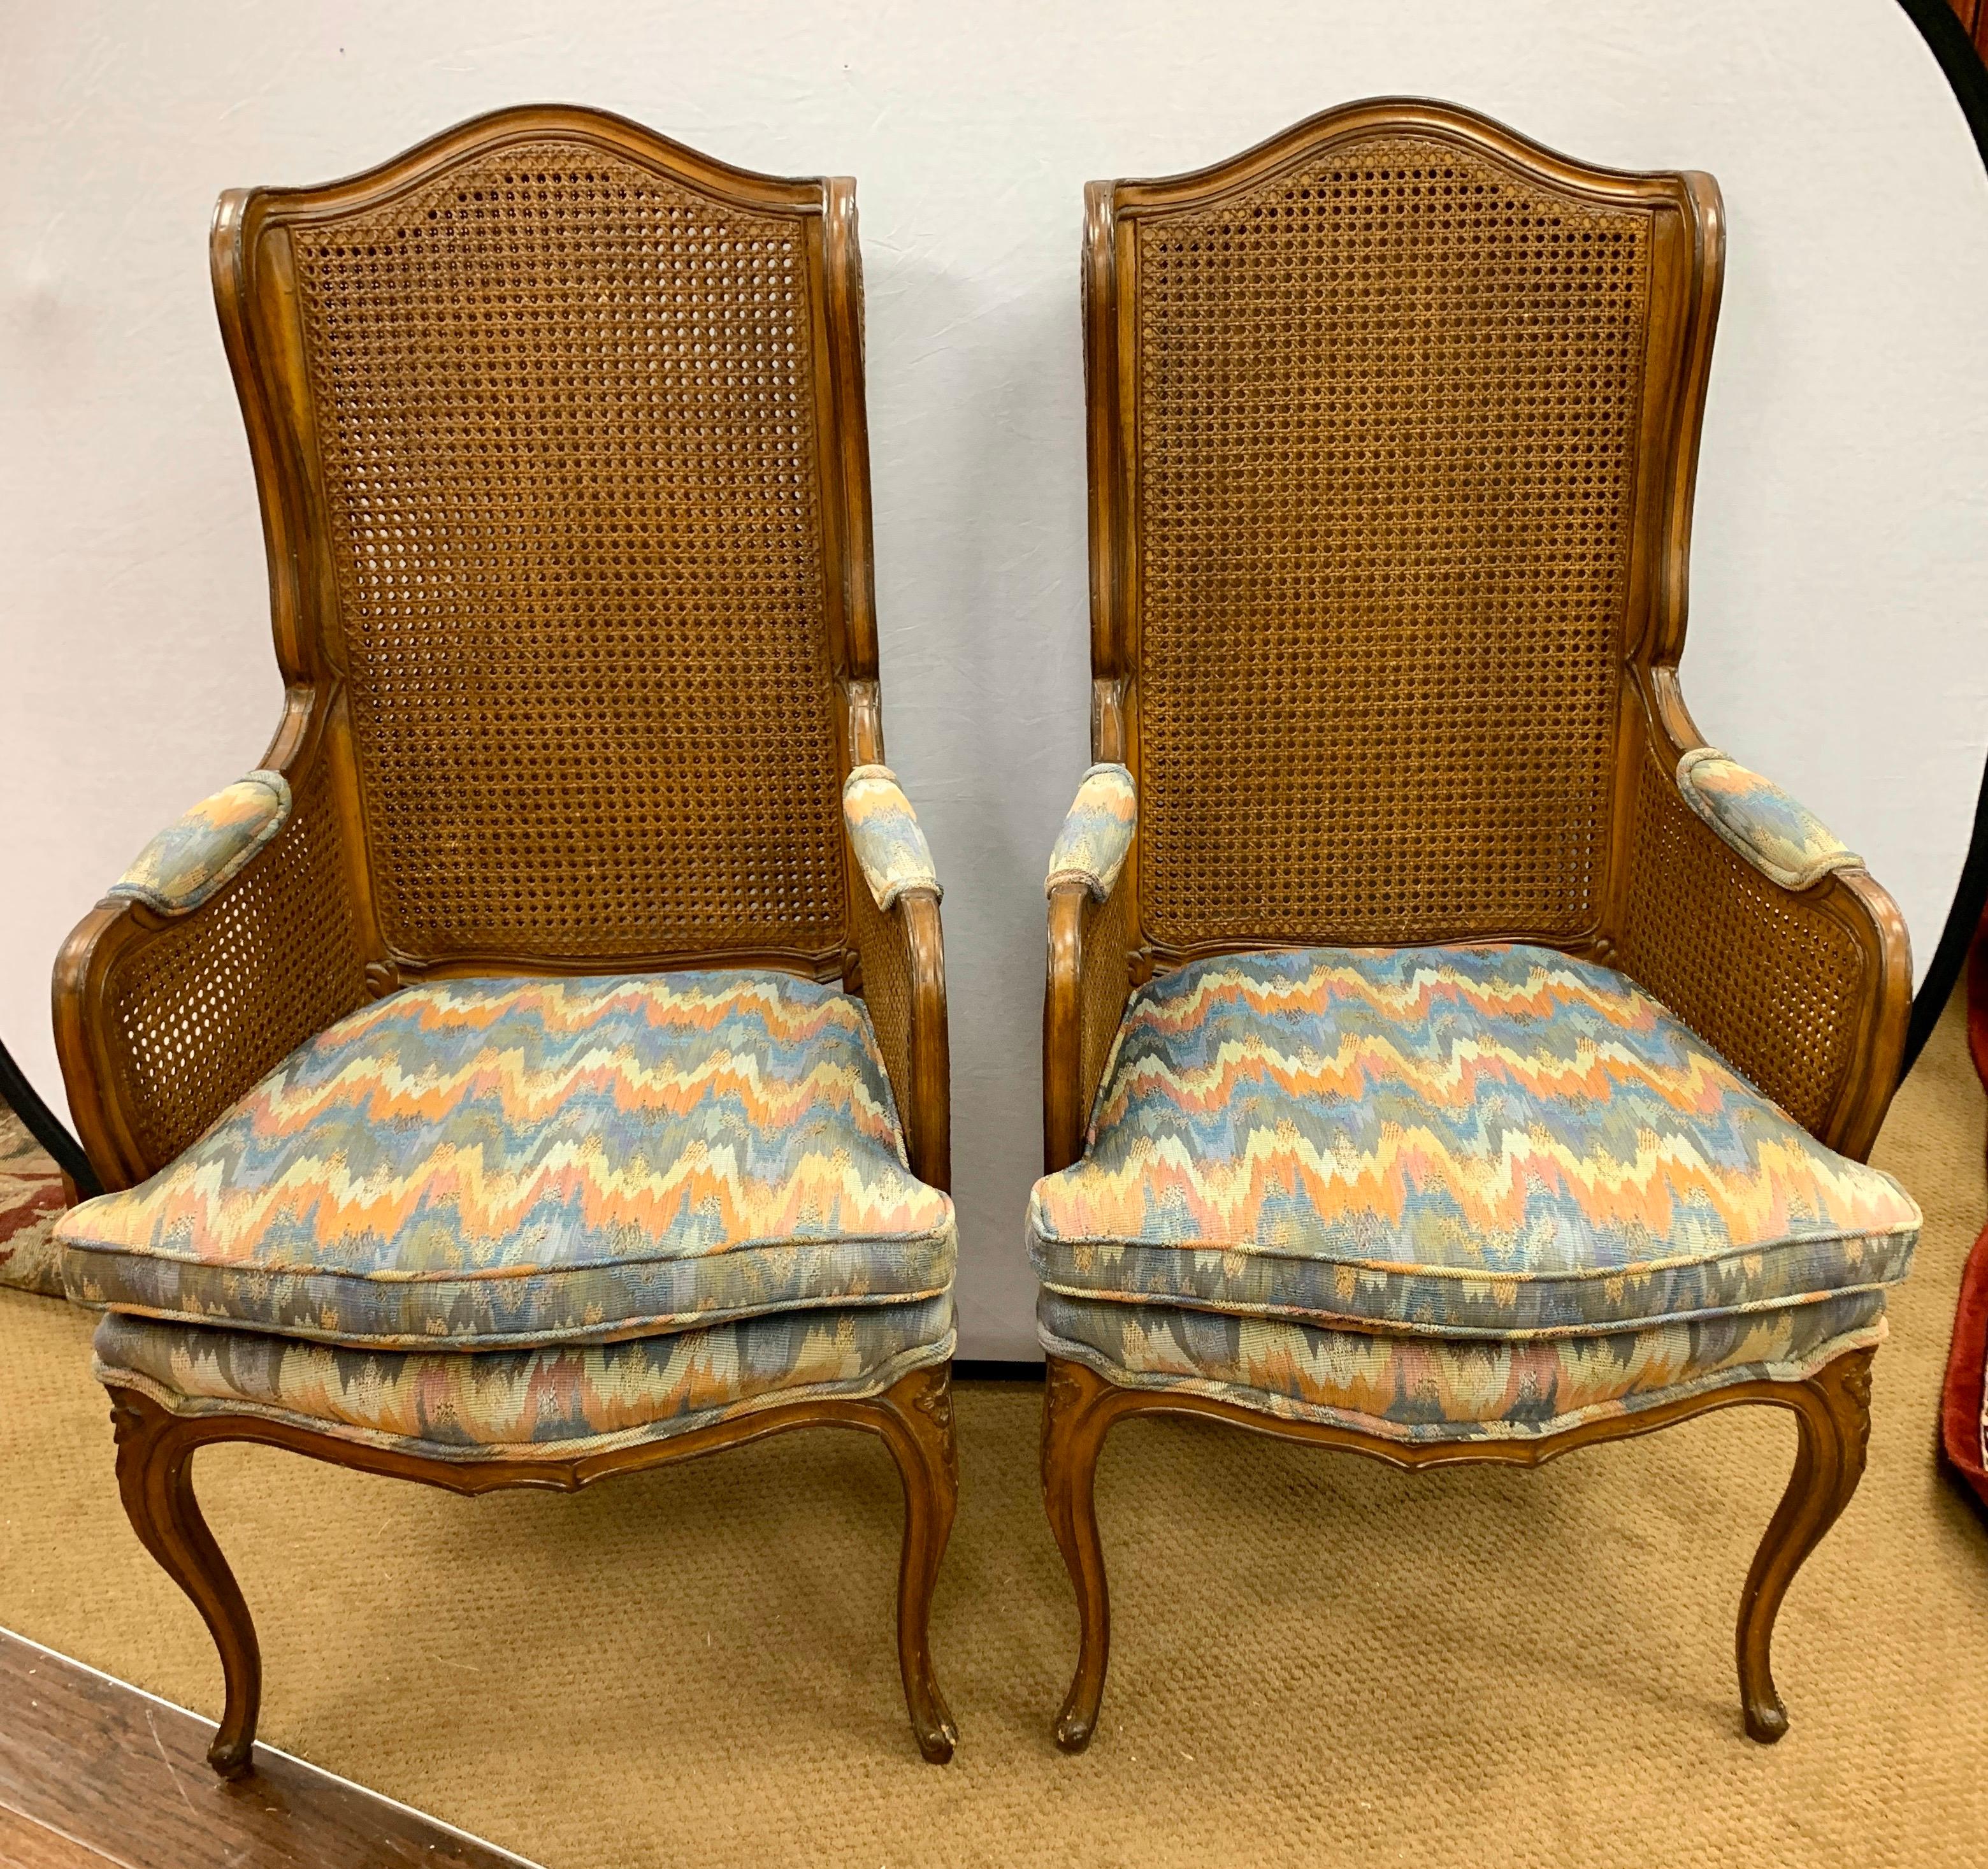 French caned back wingbacks feature an airy cane backing on arms and back and have an exposed trim with carved details. They are upholstered in original chevron print fabric on the seats and padded arm.